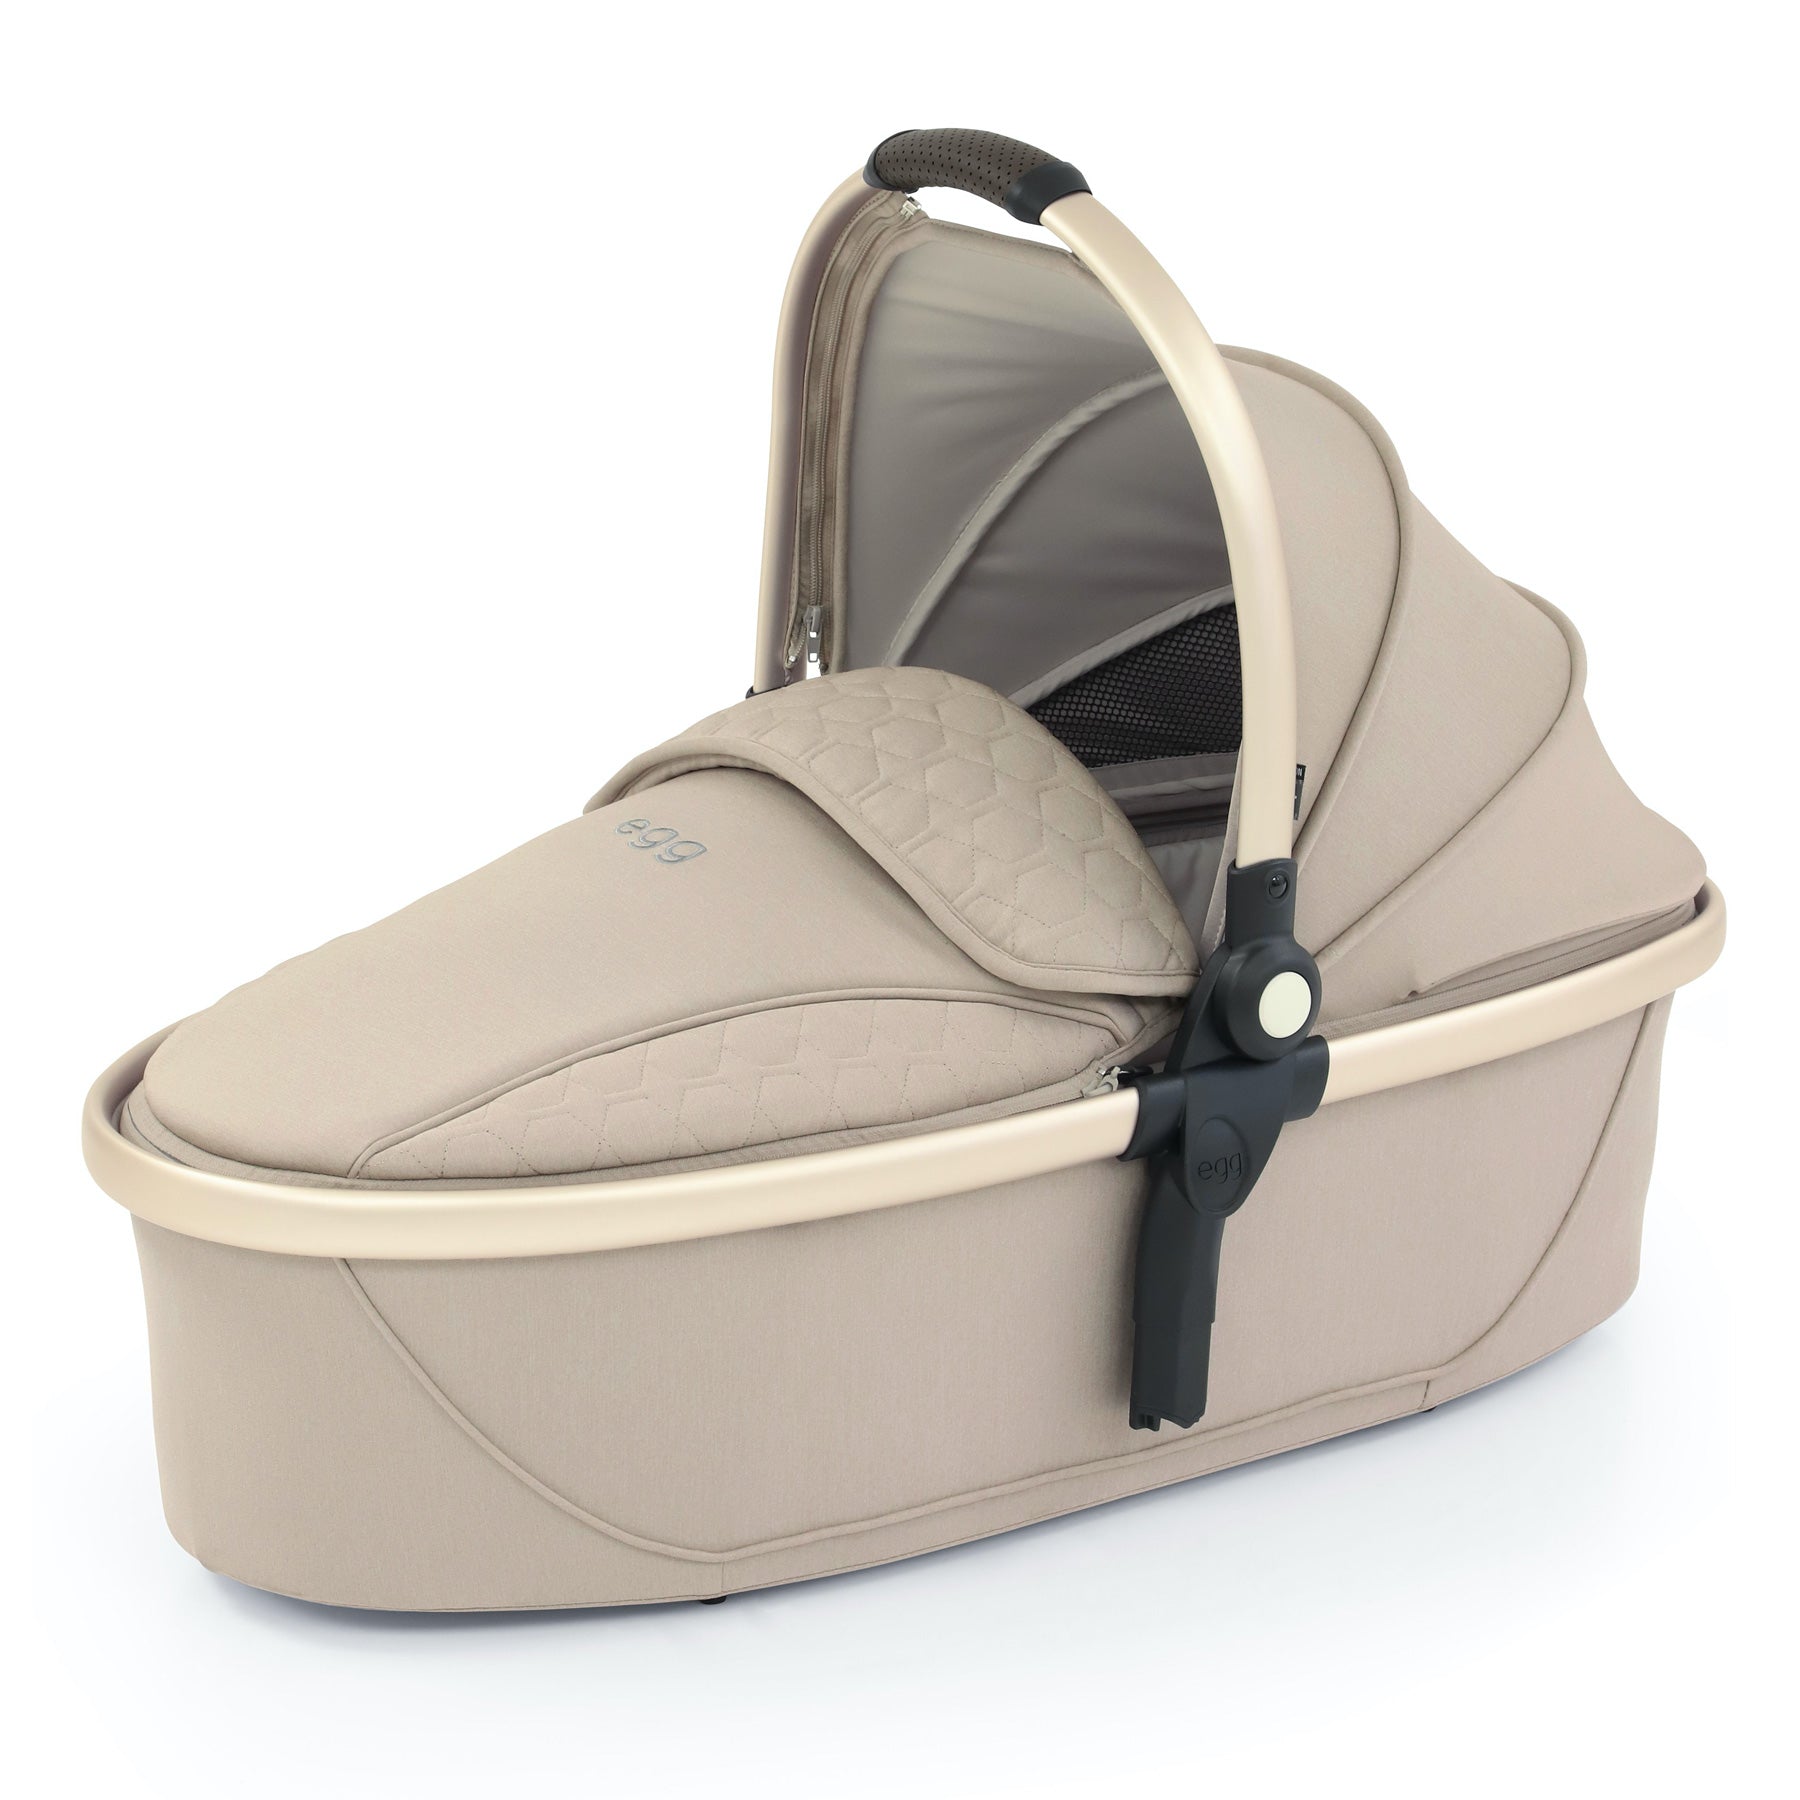 egg2® Carry Cot in Feather